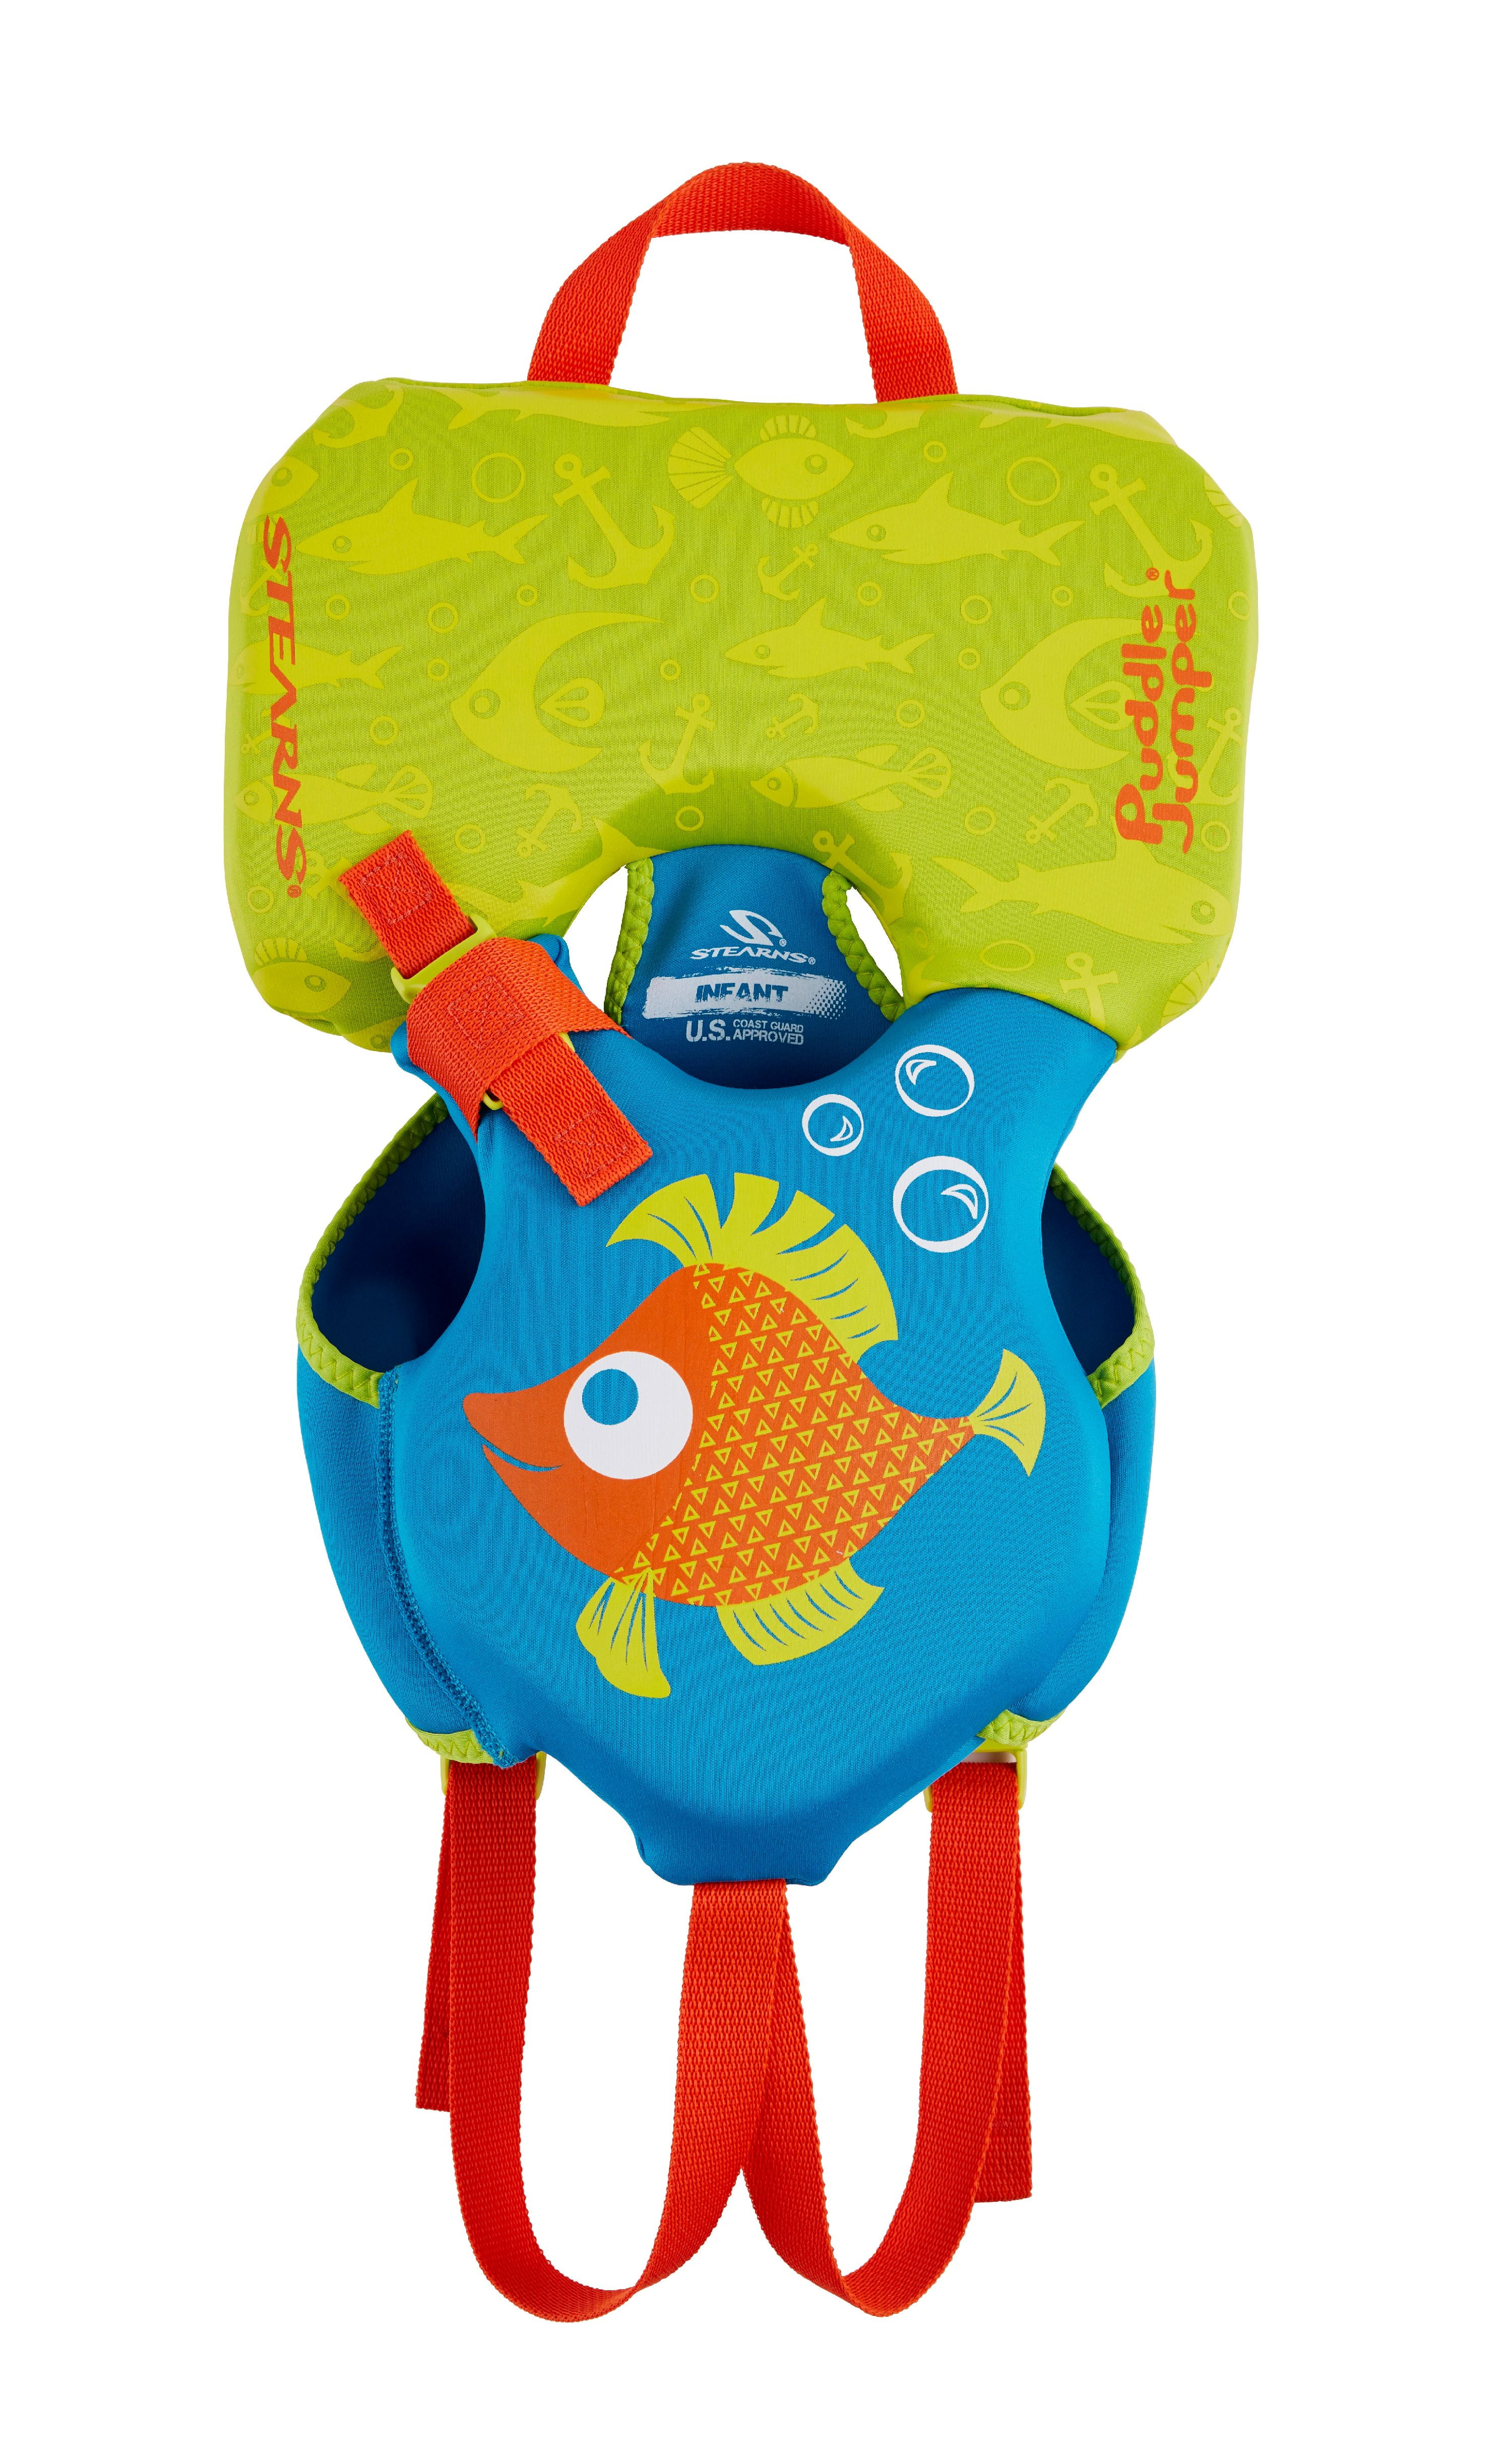 Puddle Jumper Swimming Cute Animal Life Jacket Safety Vest for Baby Children 